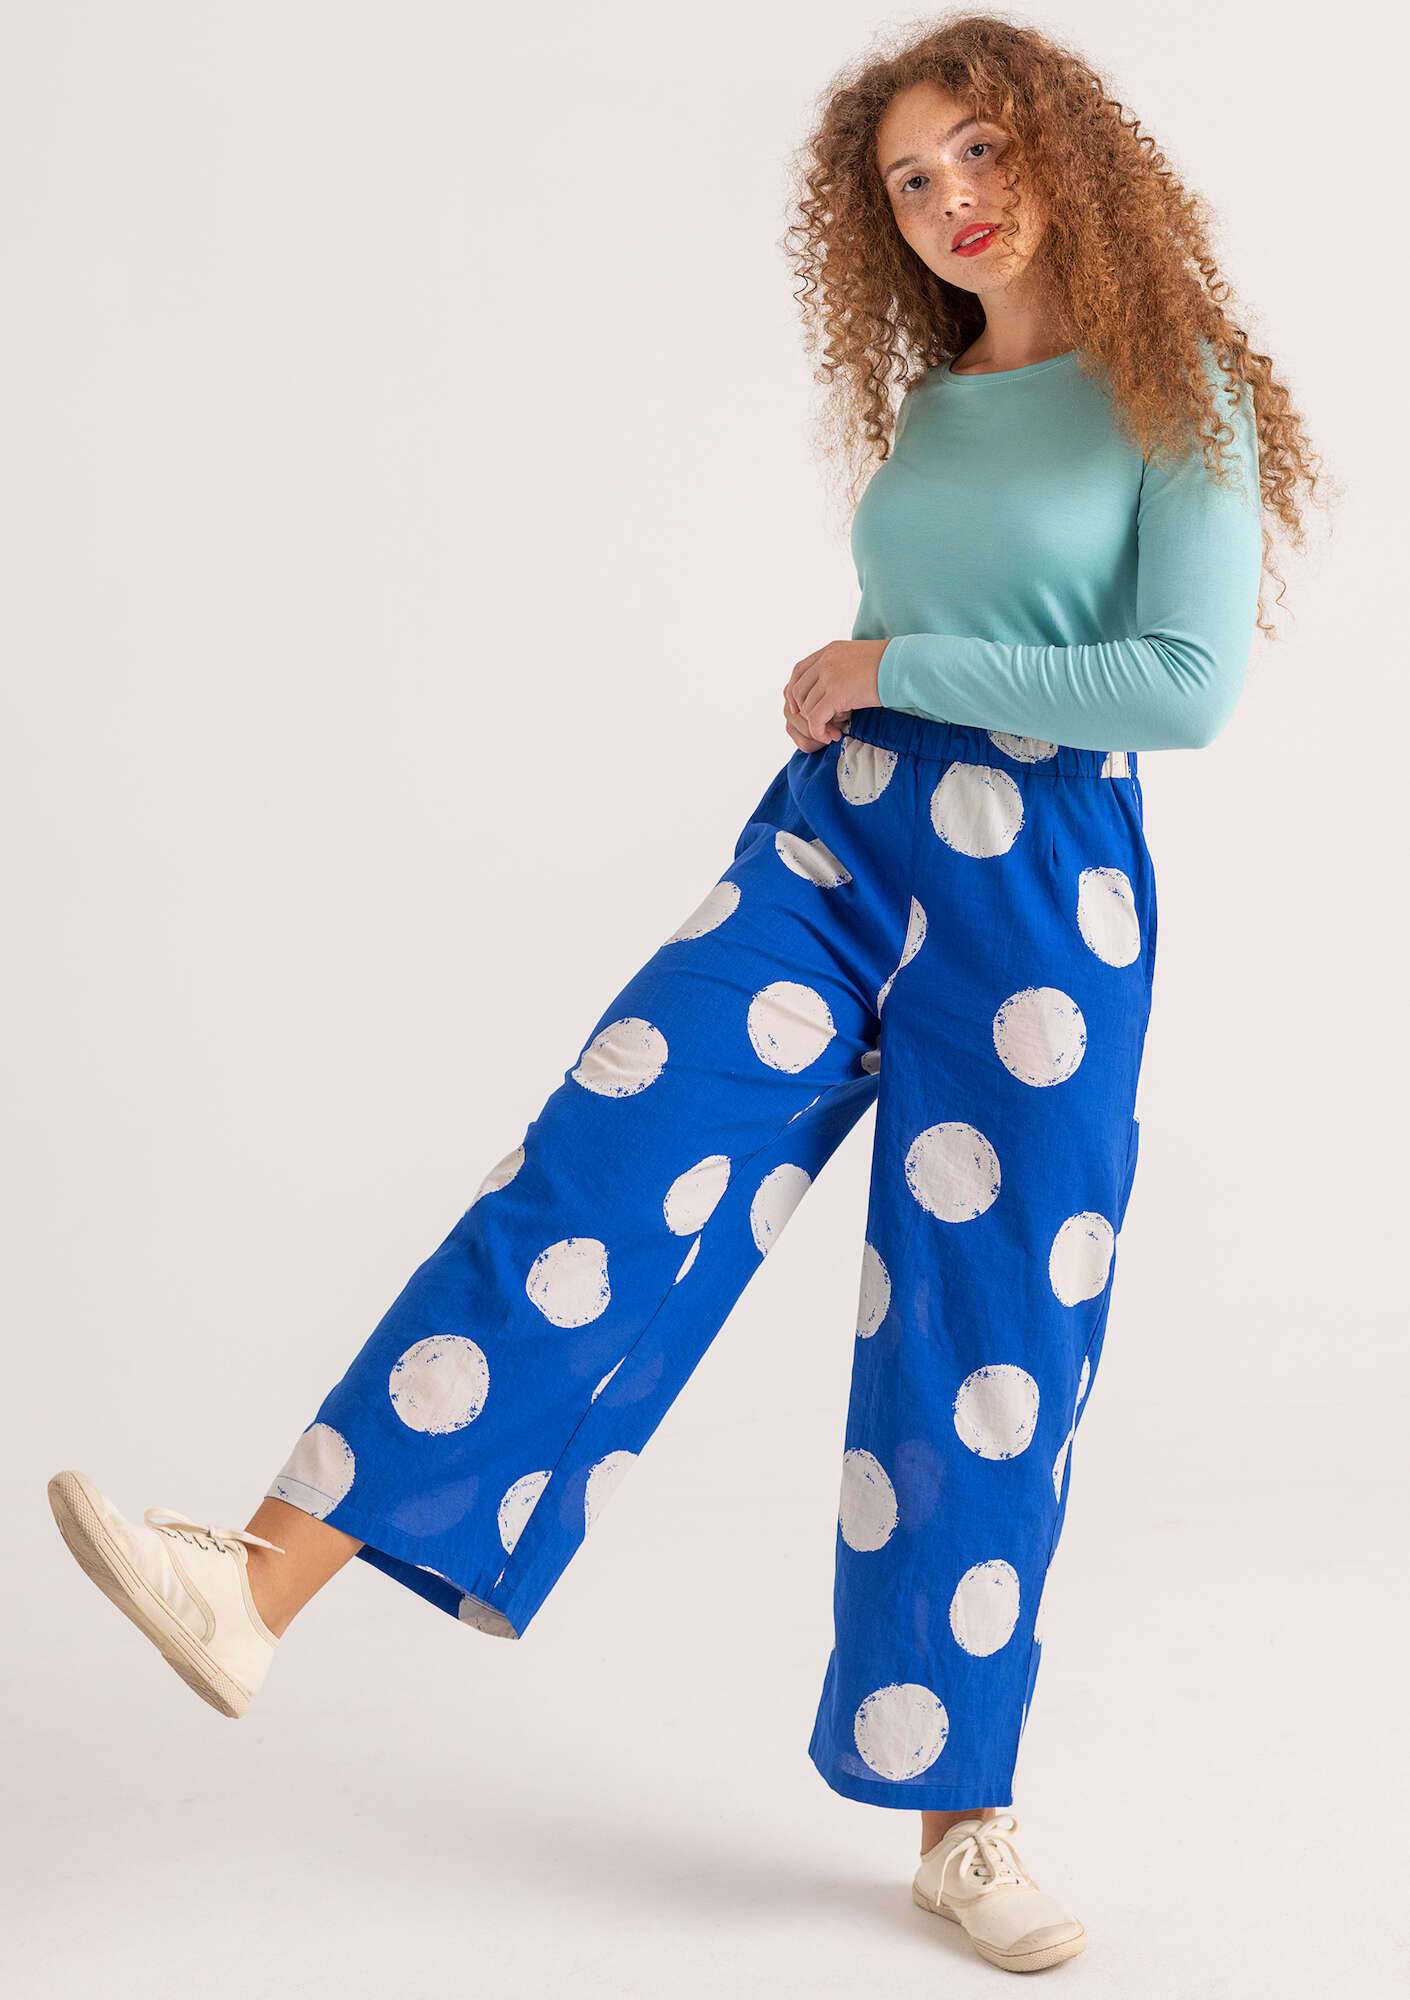  Woven “Palette” pants in organic cotton sapphire blue/patterned